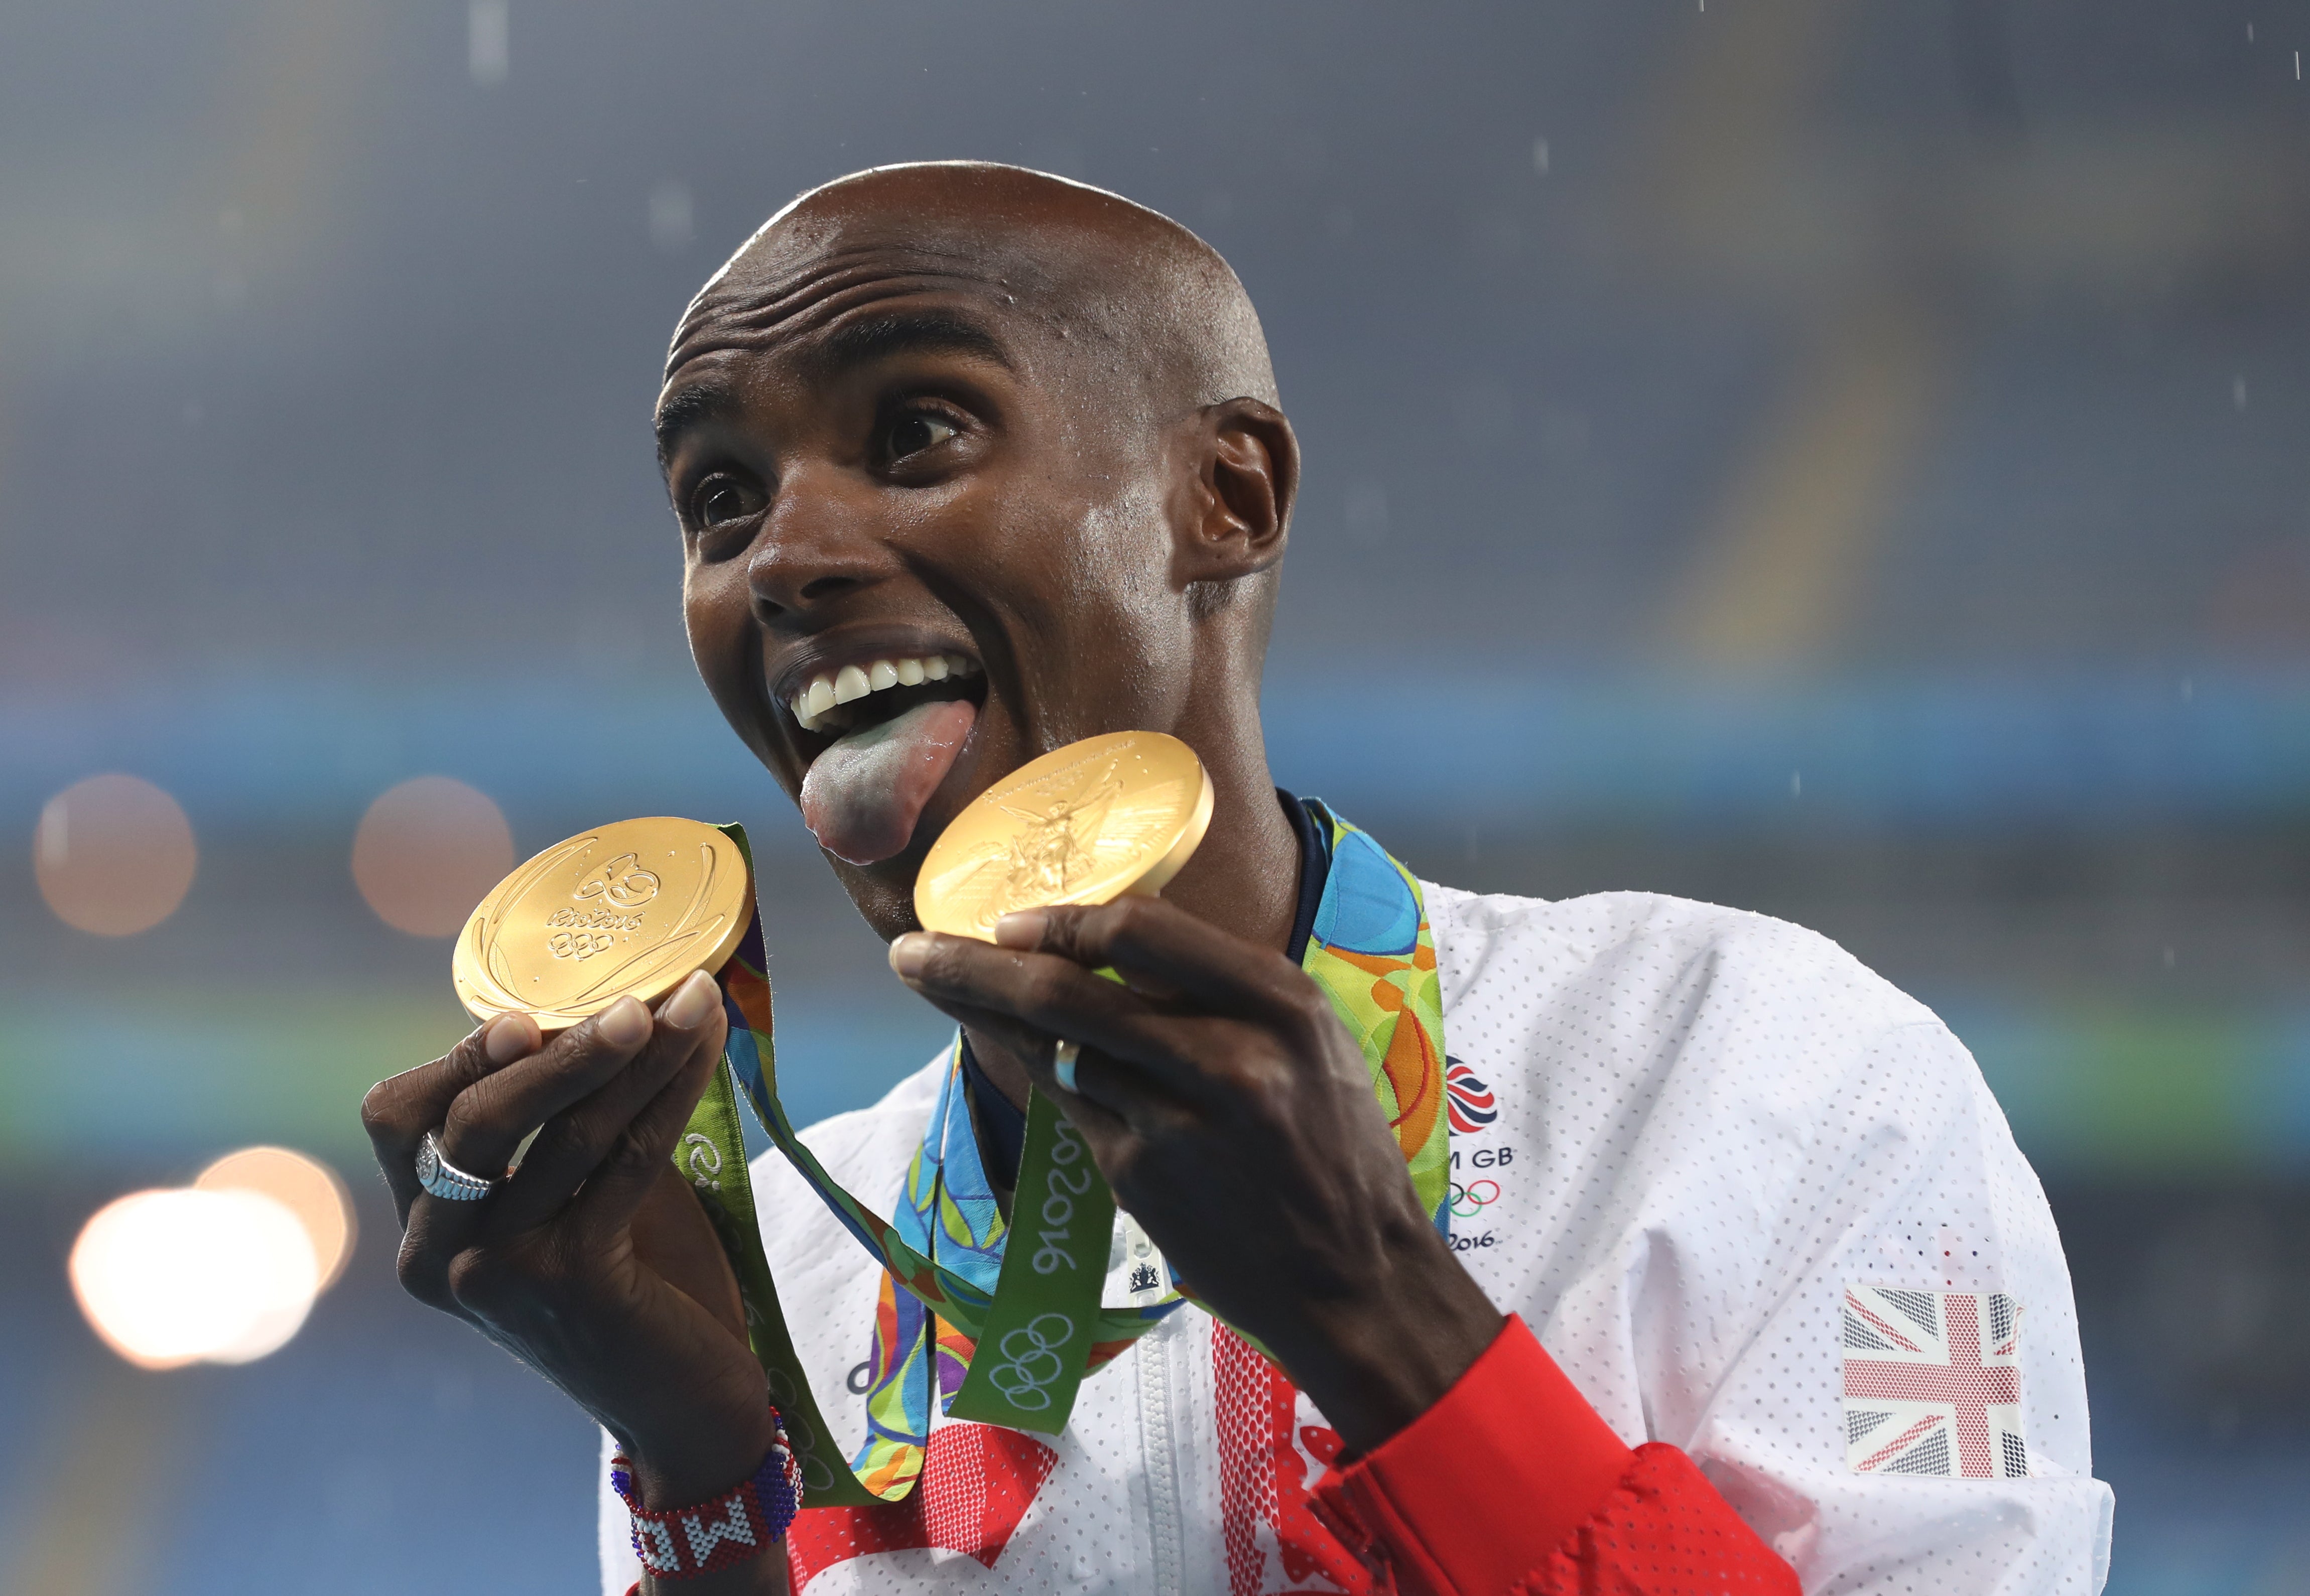 Sir Mo Farah: from tough beginnings to one of the UK’s most successful athletes